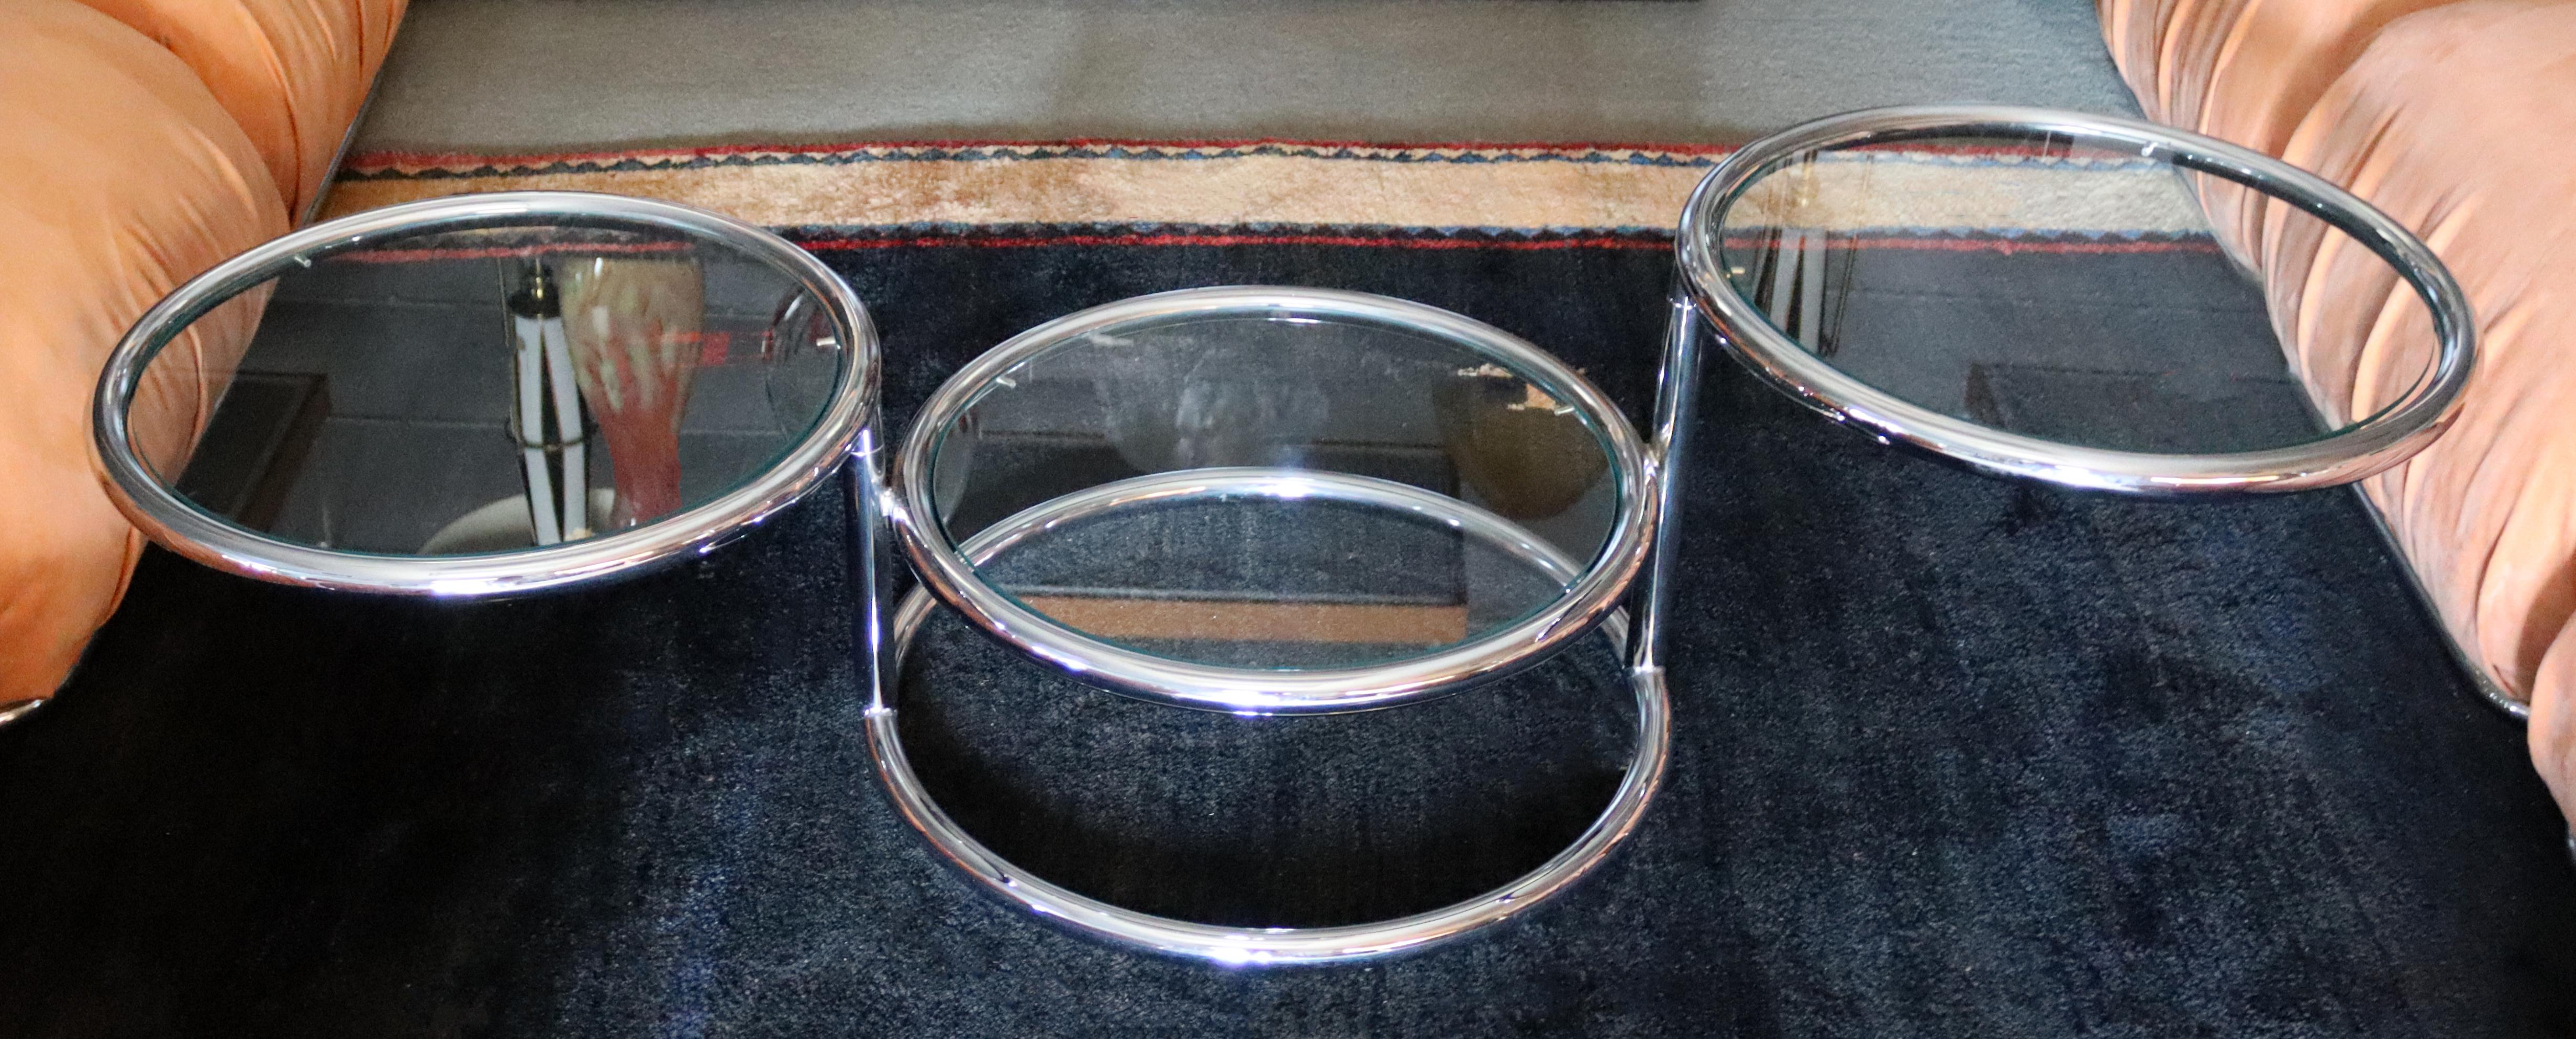 For your consideration is a terrific, three tier coffee table, with glass tops on adjustable chrome bases, by Milo Baughman, circa the 1970s. In excellent vintage condition. Each circle top measures 22